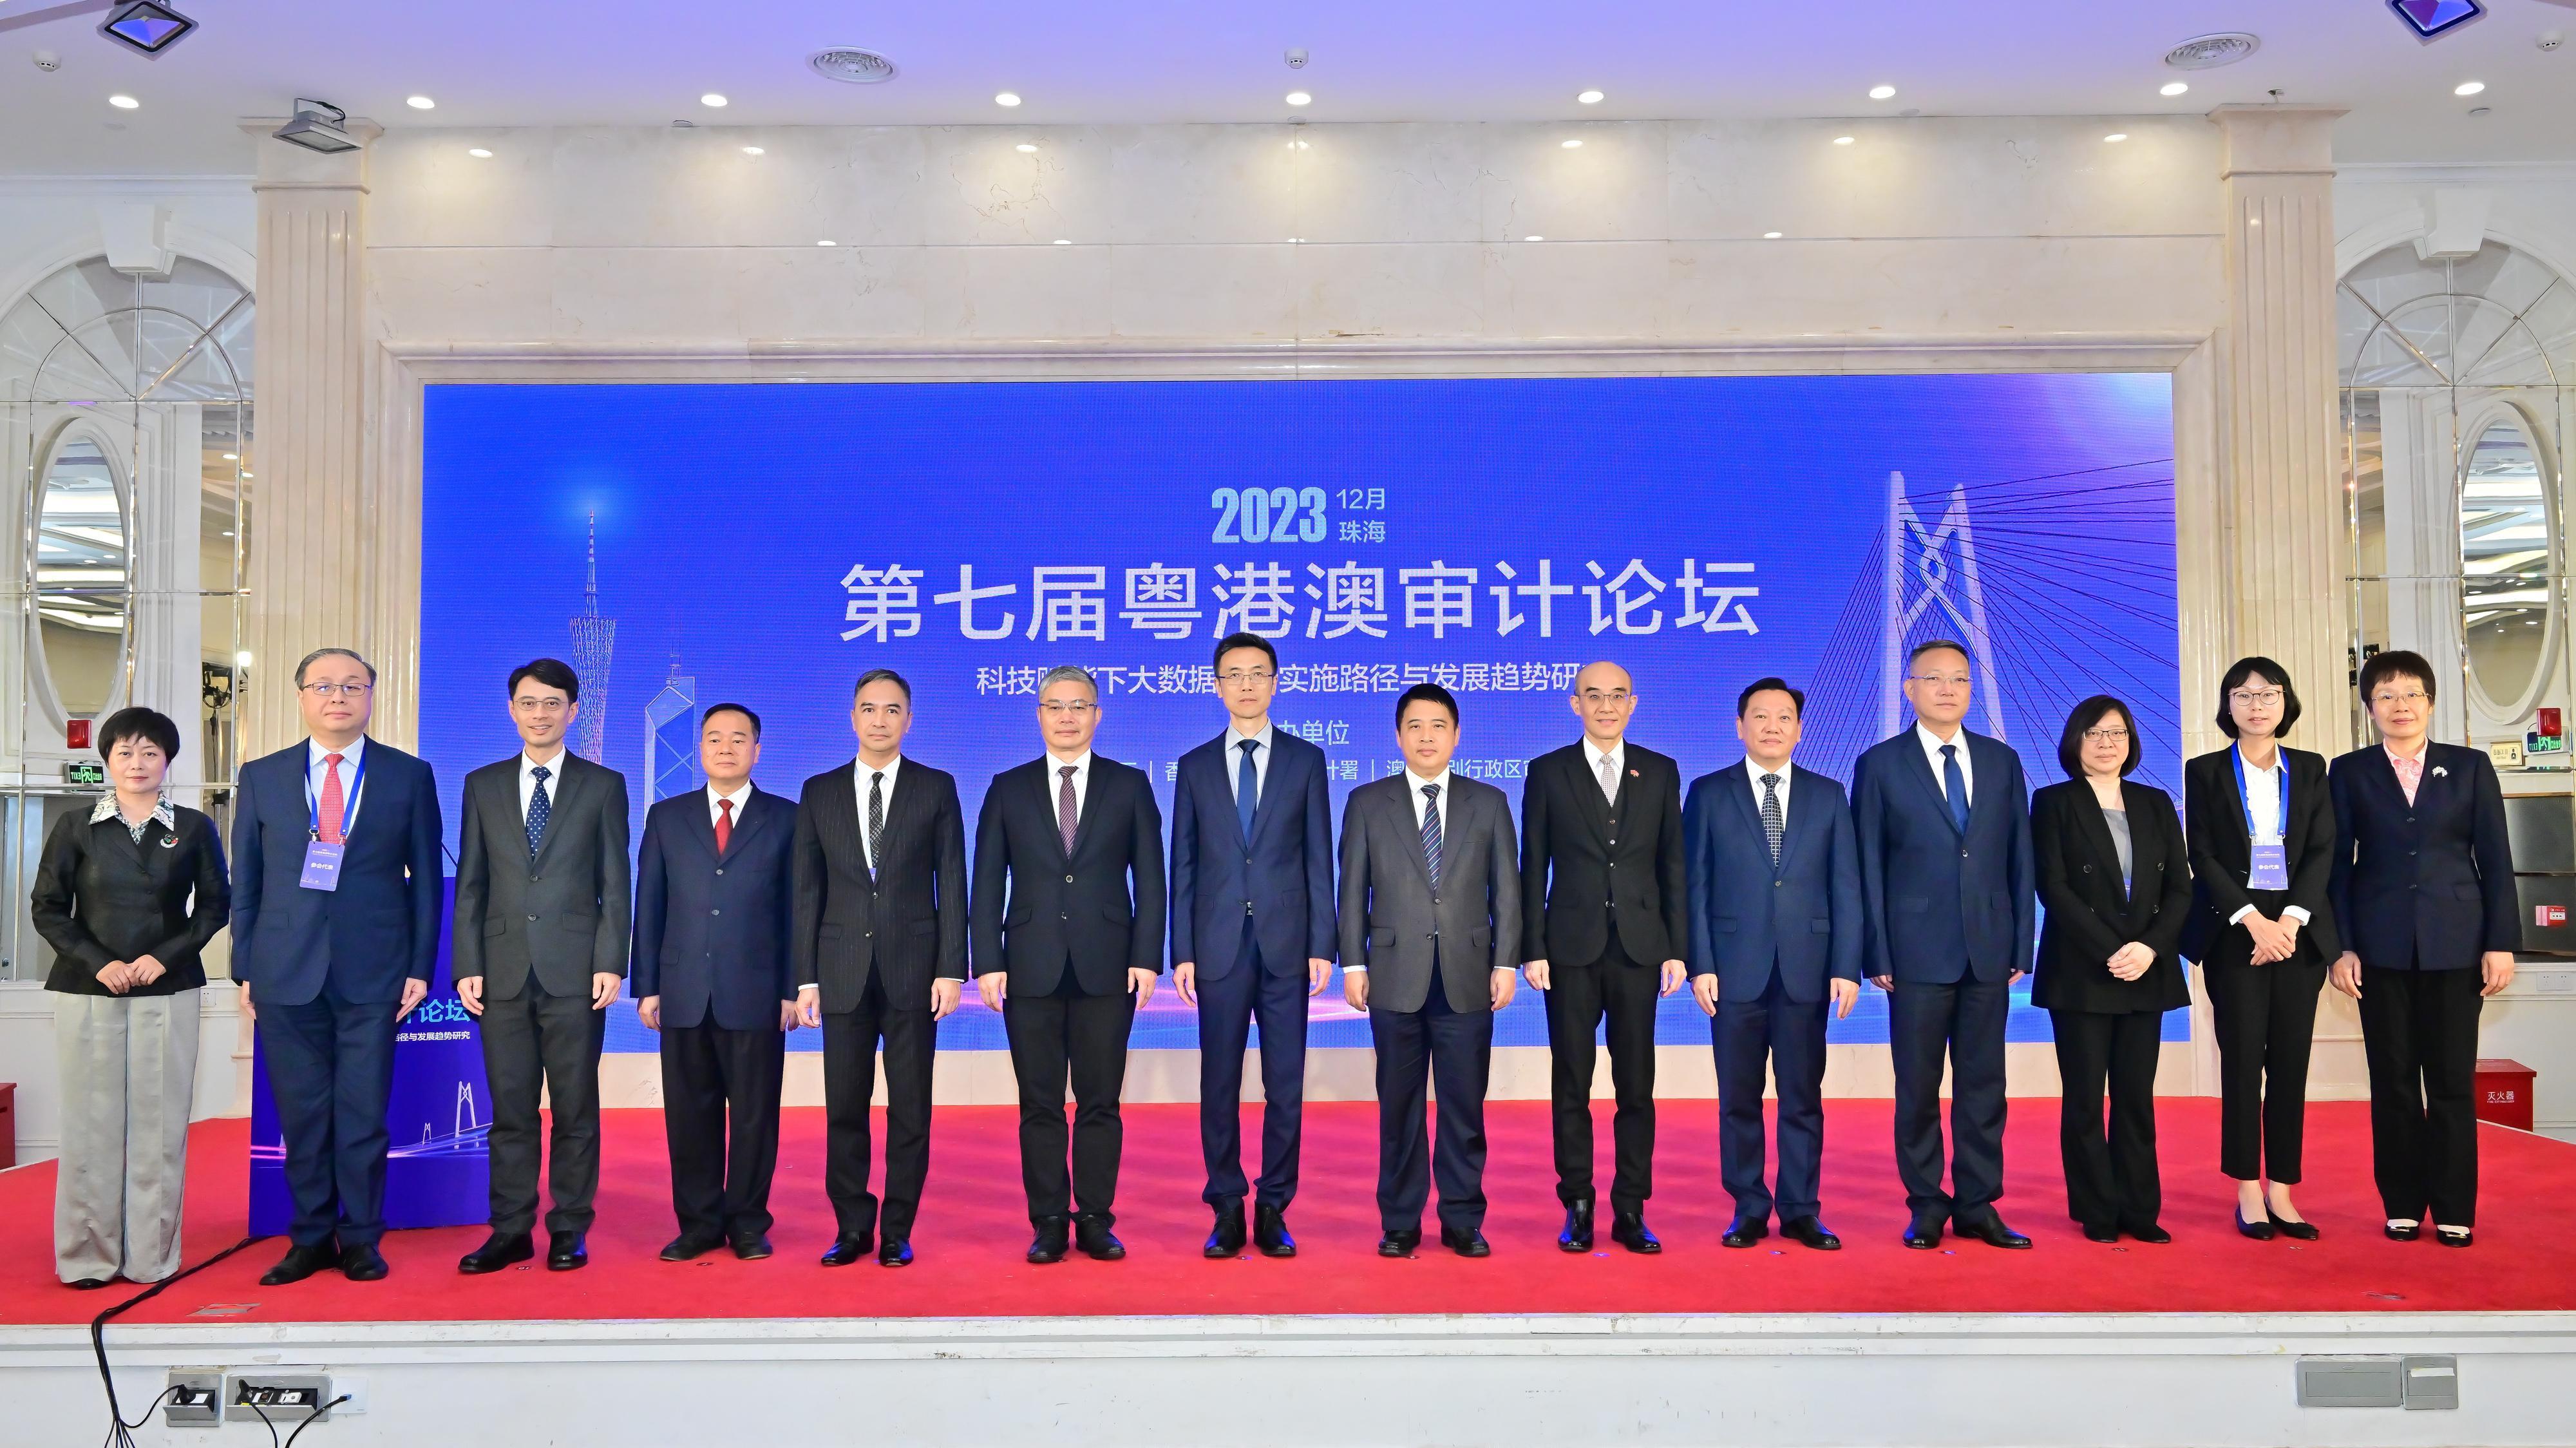 The Director of Audit, Professor Nelson Lam, led a delegation of Audit Commission officers to Zhuhai to attend the 7th Guangdong-Hong Kong-Macao Audit Conference 2023 held December 6 to 8. The Director of Hong Kong, Macao and Taiwan Offices of the National Audit Office, Mr Jiang Haiying (seventh left); Deputy Secretary of the Communist Party of China Zhuhai Municipal Committee and the Mayor of the Zhuhai Municipal Government, Mr Huang Zhihao (seventh right); the Secretary of the Leading Party Members’ Group and Director of the Audit Office of Guangdong Province, Mr Ma Xuebin (sixth left); the Commissioner of Audit of Macao Special Administrative Region, Mr Ho Veng-on (fifth left); Deputy Director General of the Hong Kong and Macao Affairs Office of the People's Government of Guangdong Province Mr Huang Duanlian (fifth right); and Professor Lam (sixth right), gather with members of the auditing profession.